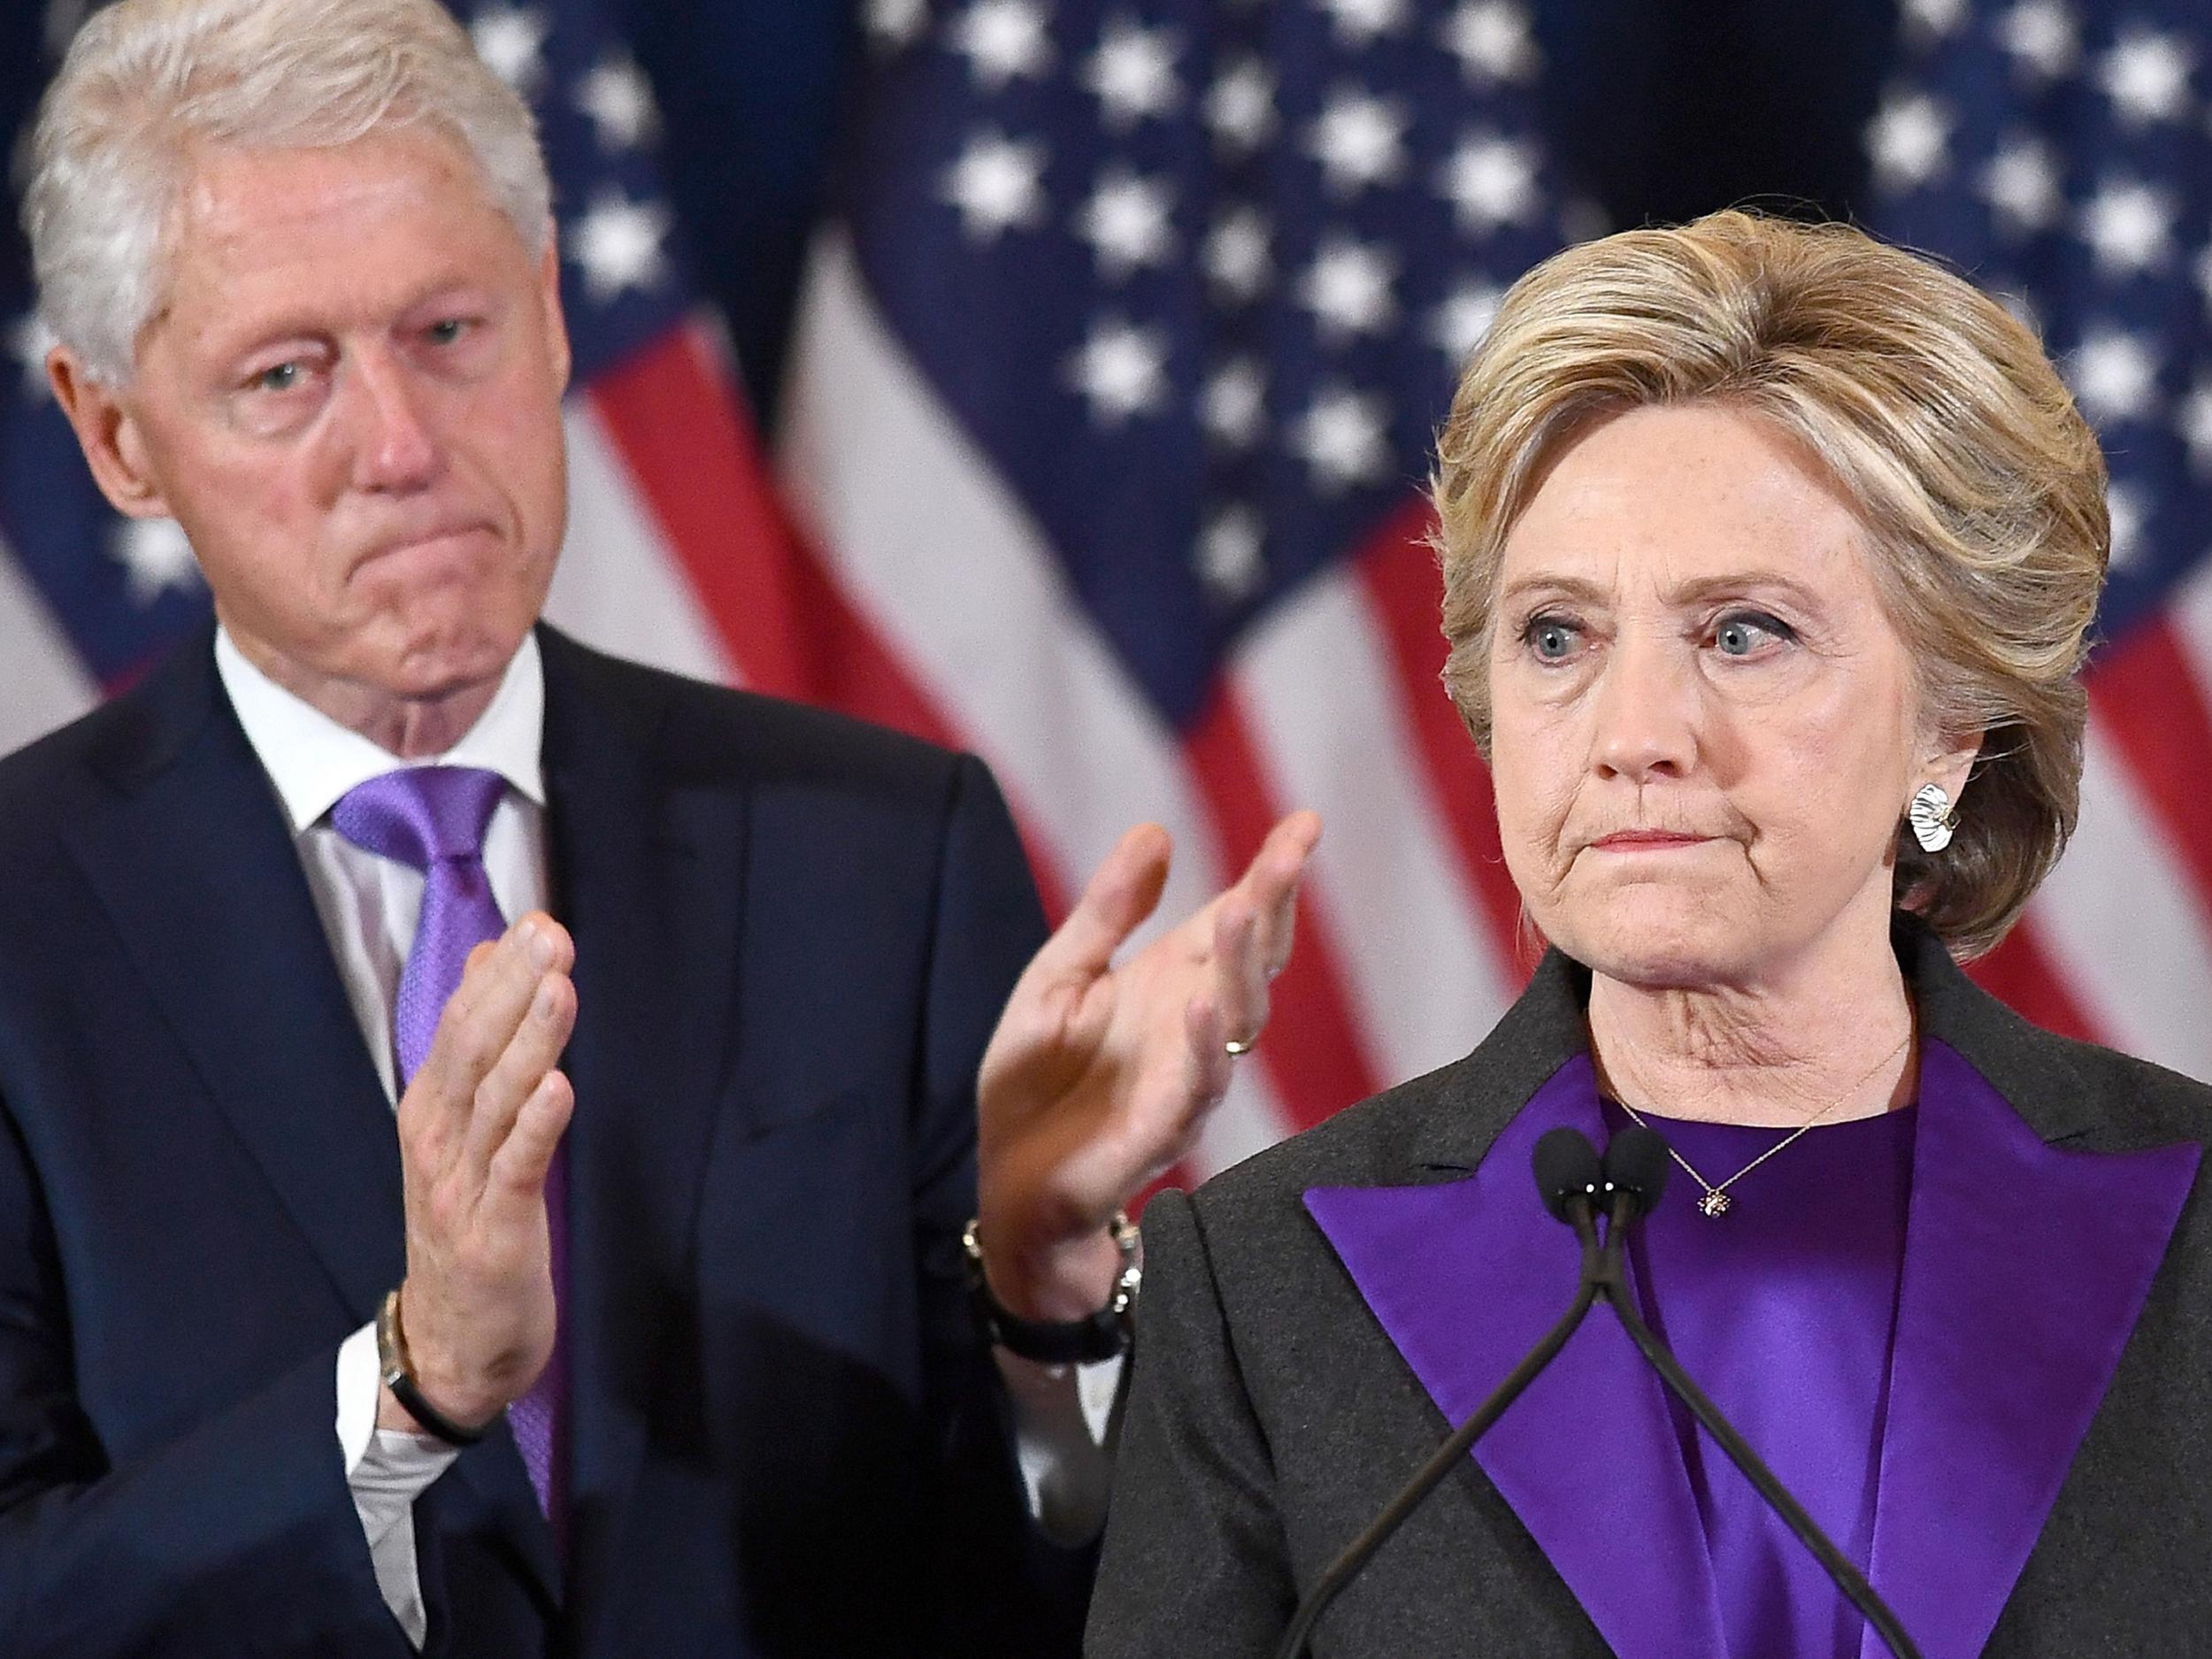 Hillary Clinton and her husband contemplate defeat